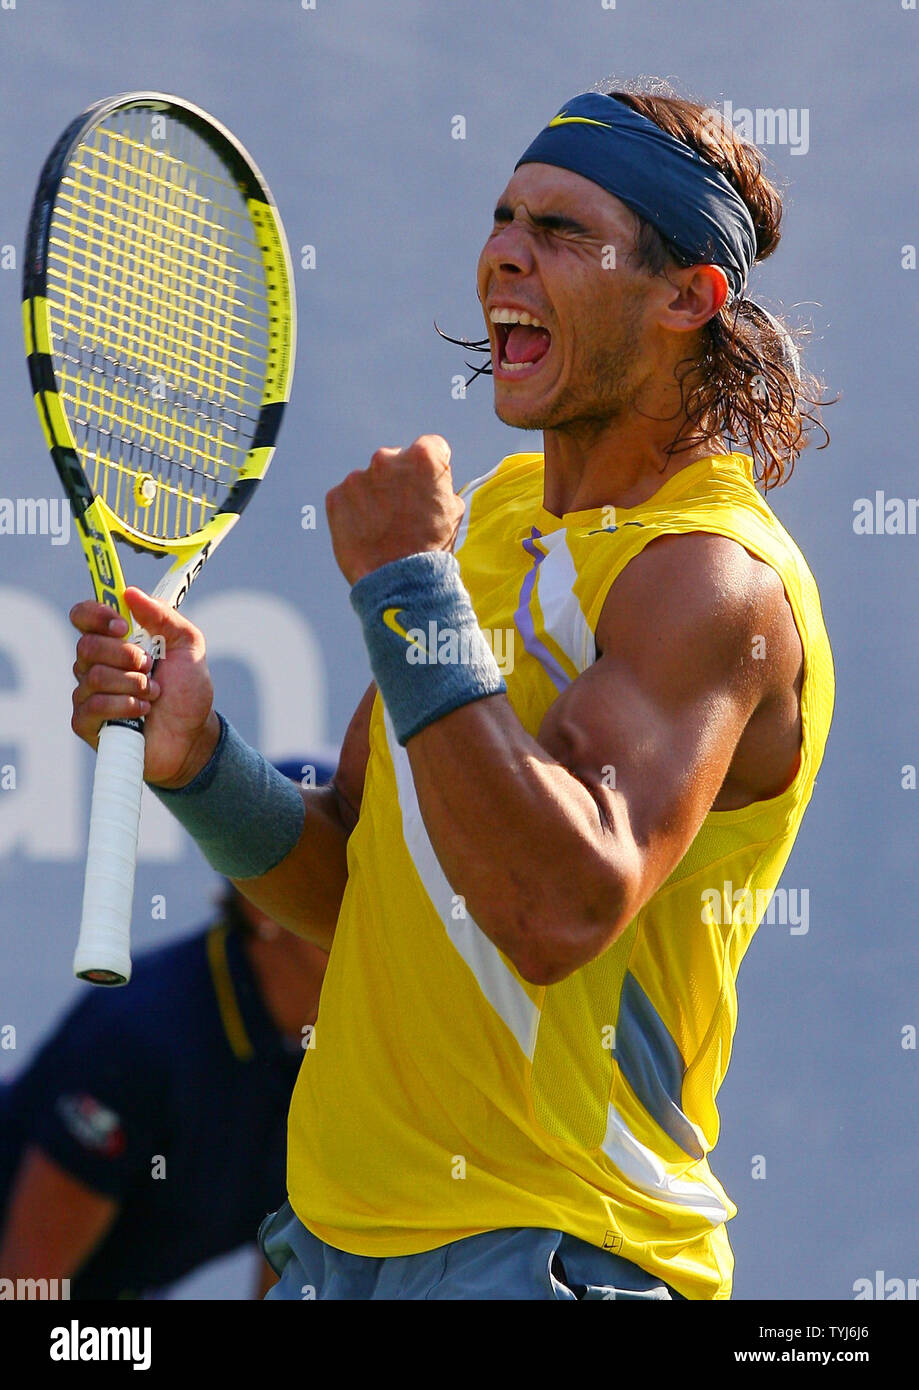 Rafael Nadal Pumps his fist after winning the third set in his first round  straight sets defeat of Alun Jones during day 3 at the U.S. Open in New  York City on